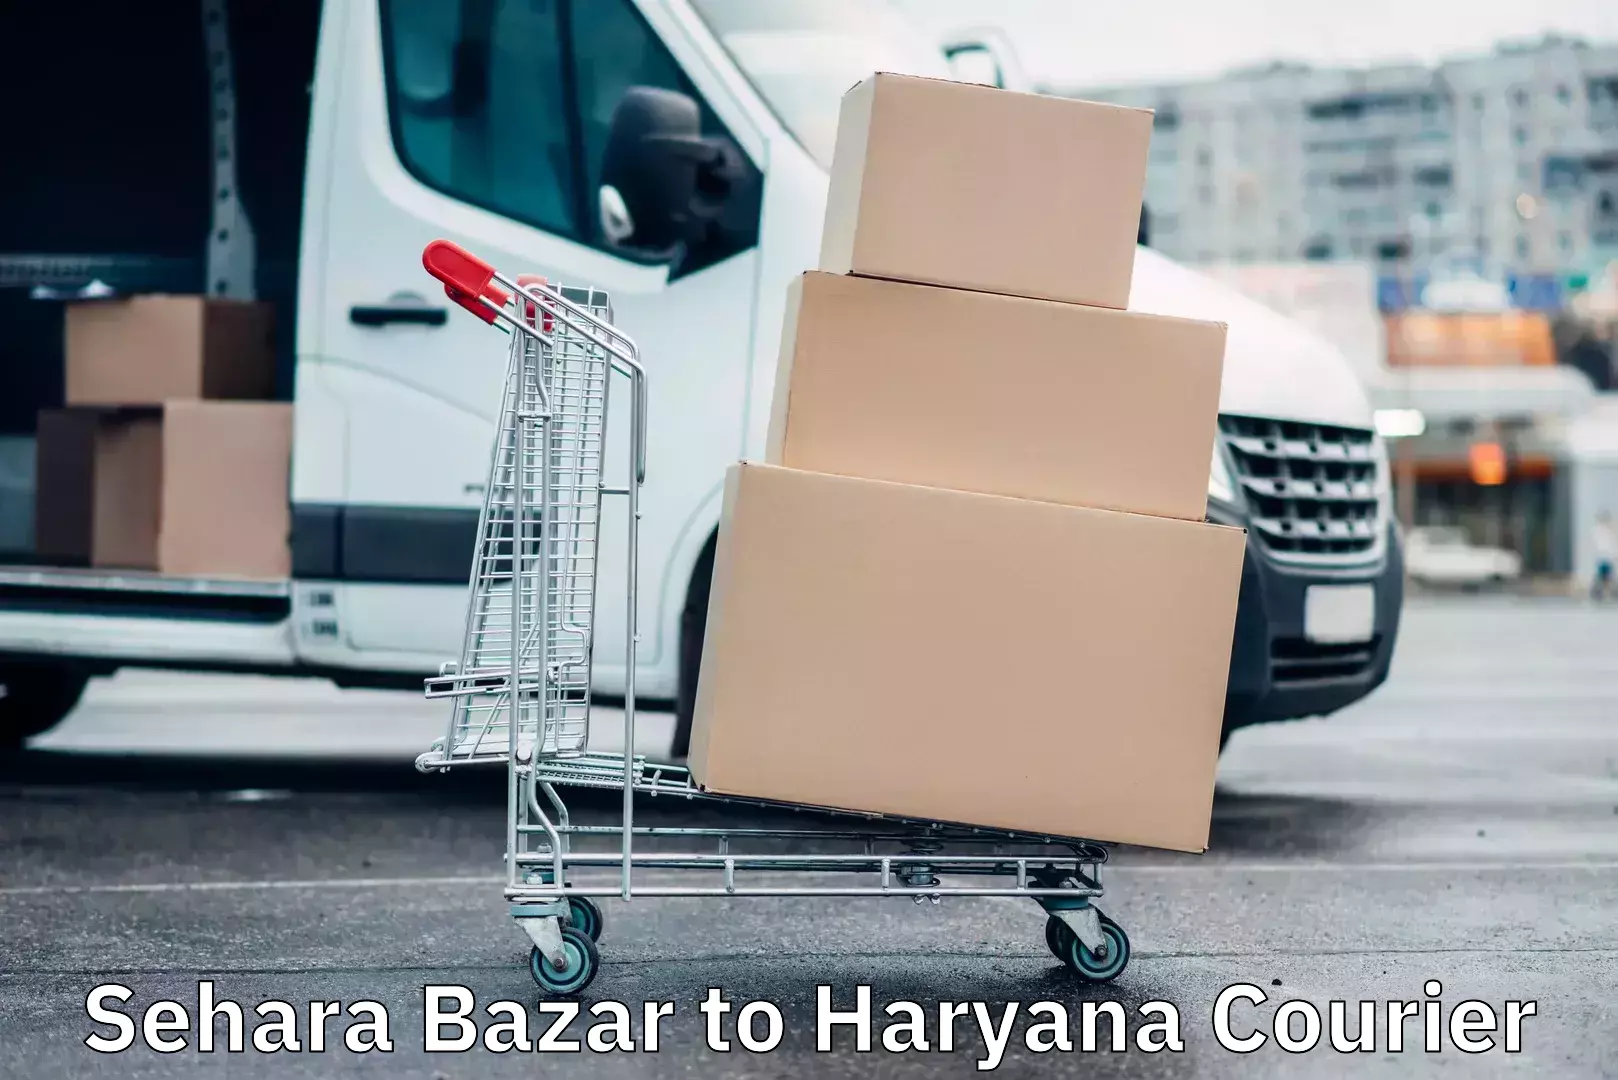 Express delivery solutions Sehara Bazar to Haryana